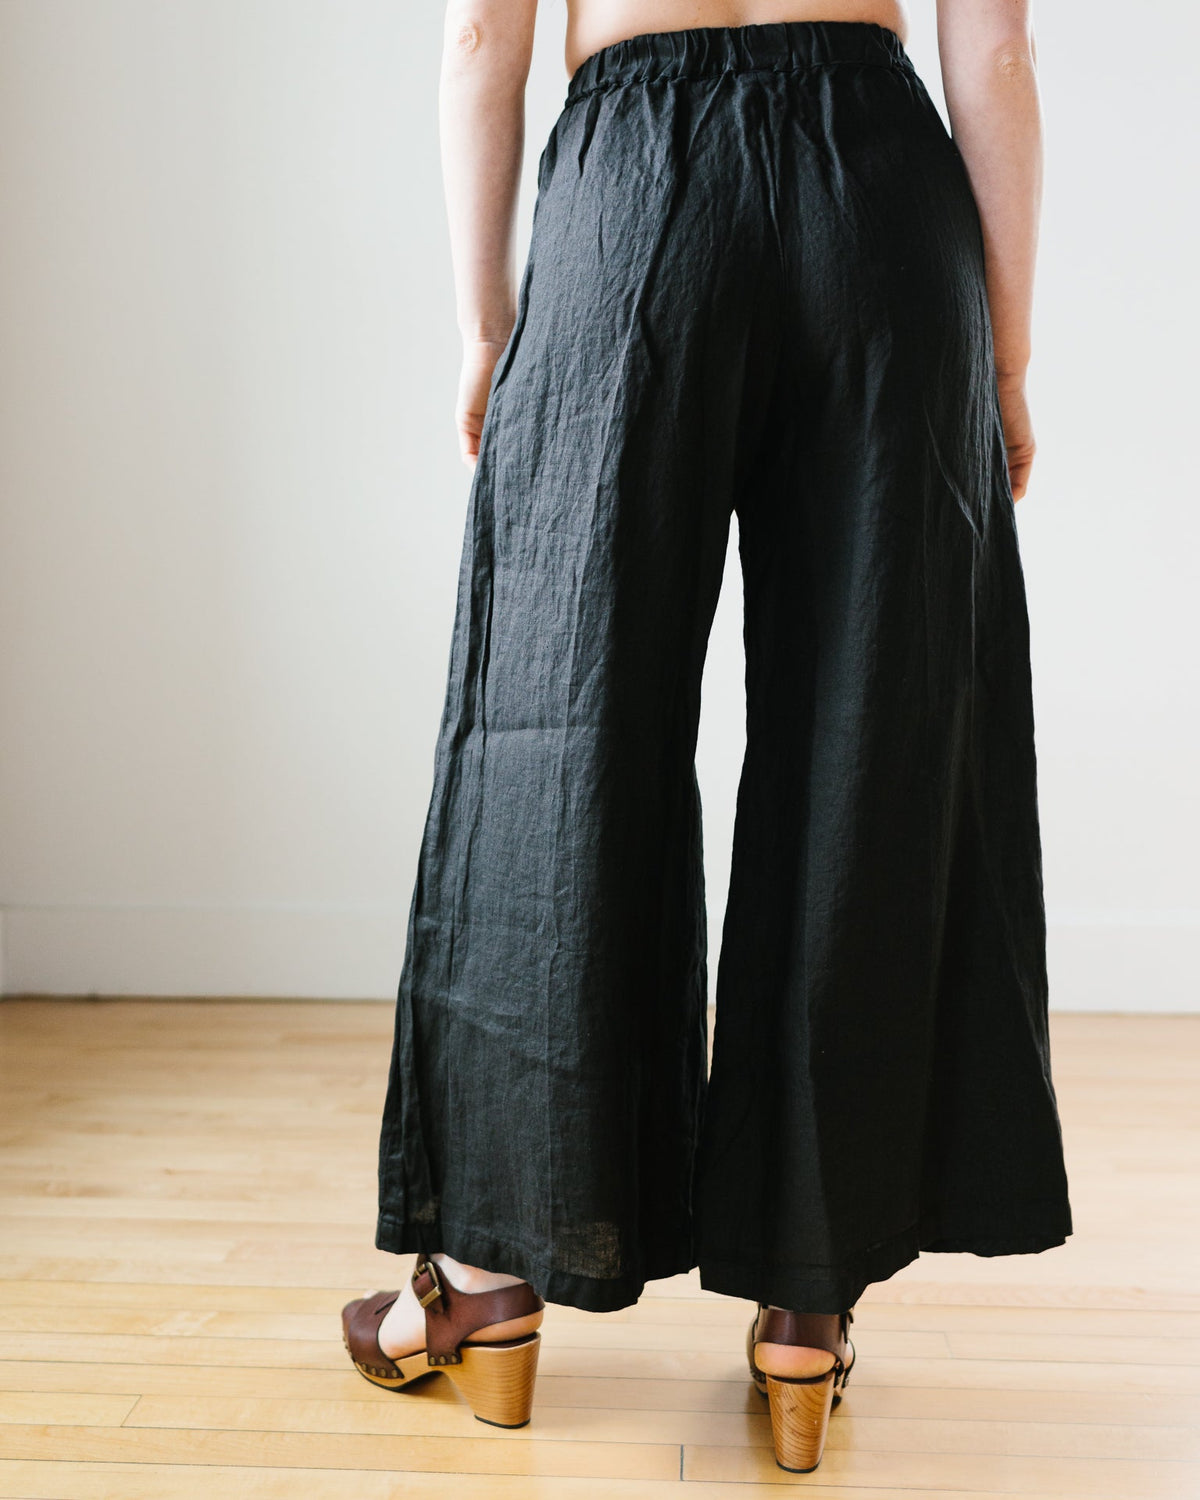 CP Shades Wendy Pant in Black Linen